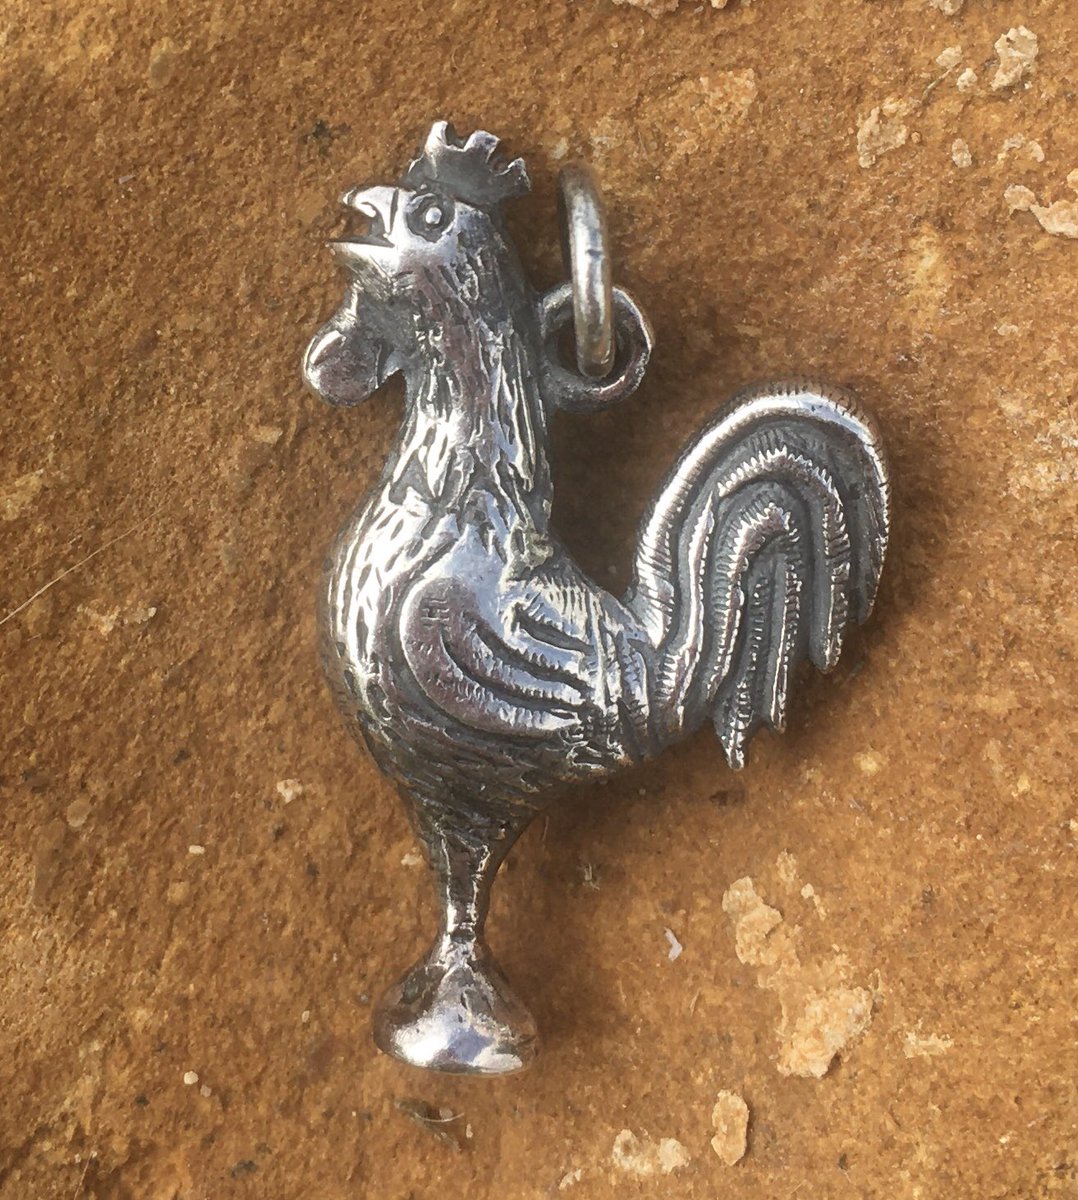 #etsyshop #JamesAvery #Vintage #SterlingSilver #Rooster #Charm #Chicken #FarmAnimals #silver #giftsforher #vintagejewelry #etsy #etsygifts #etsyfinds #etsyseller #barnyards #charmbracelet #jewelry #collectables #cute  etsy.me/3UCKs6b